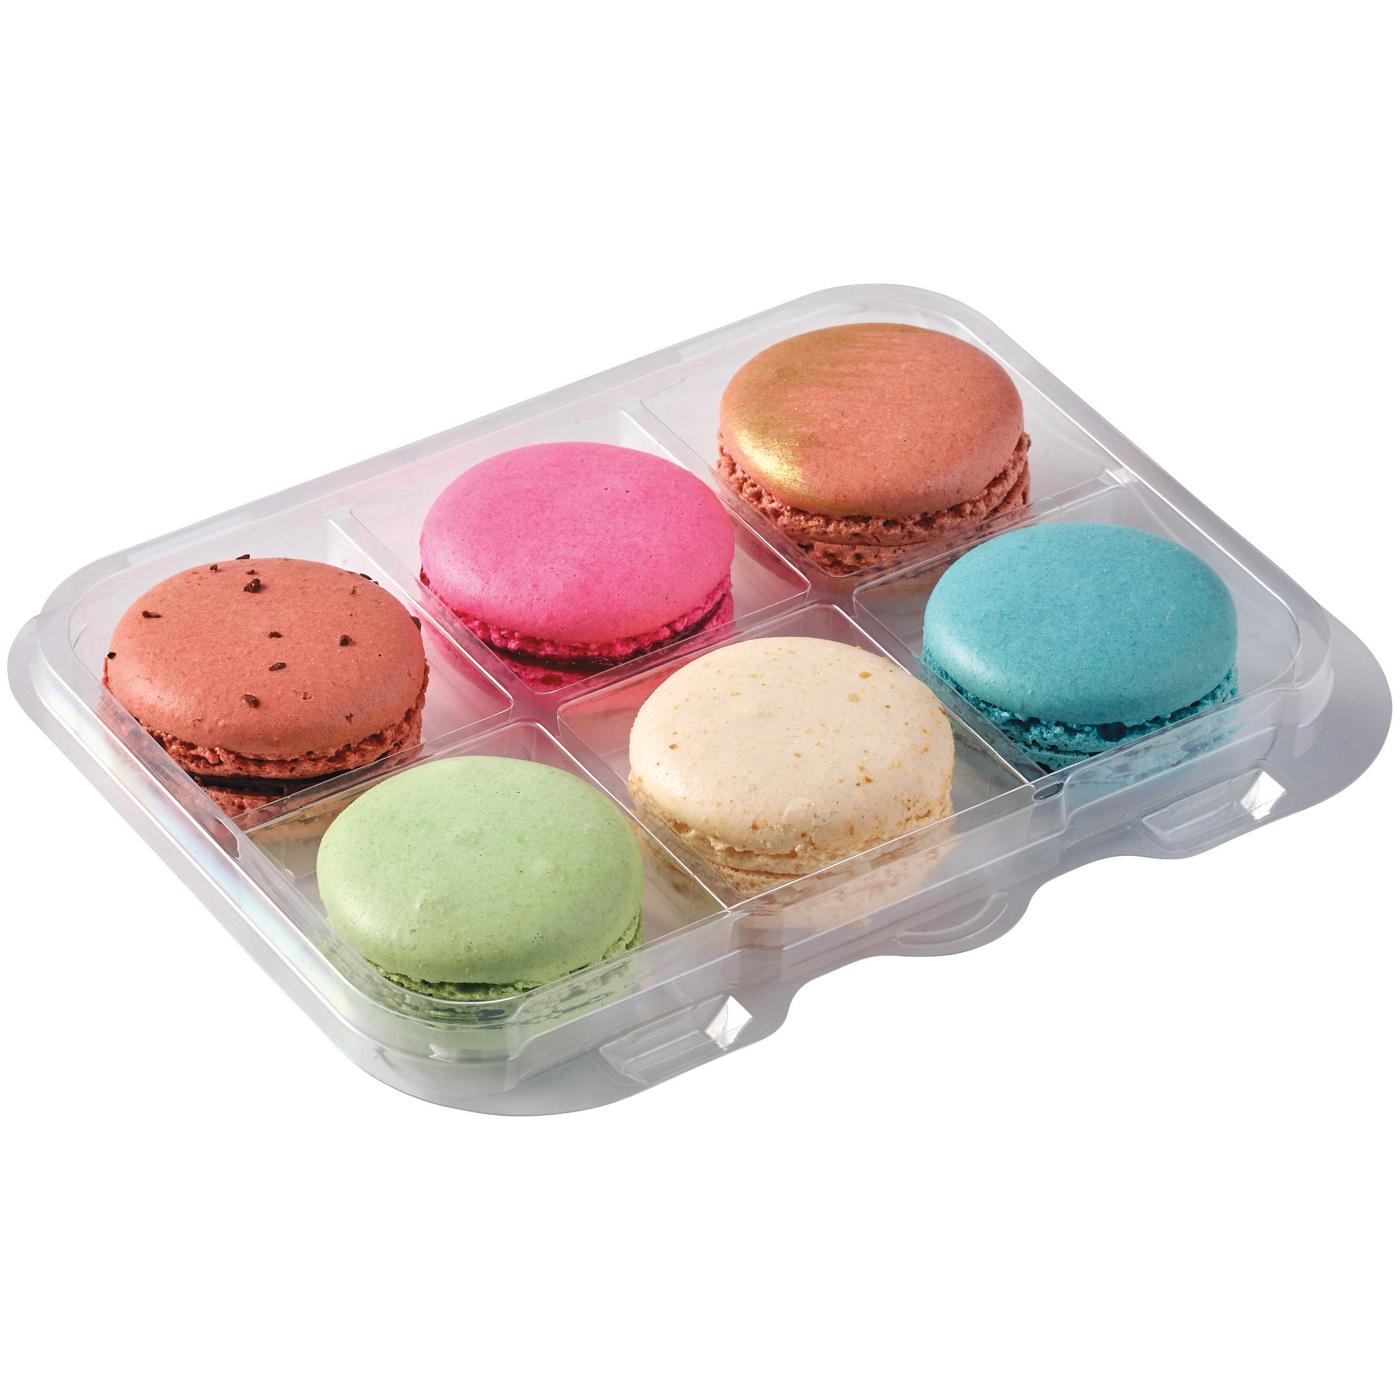 H-E-B Bakery Macaron Cookies Variety Pack; image 2 of 3